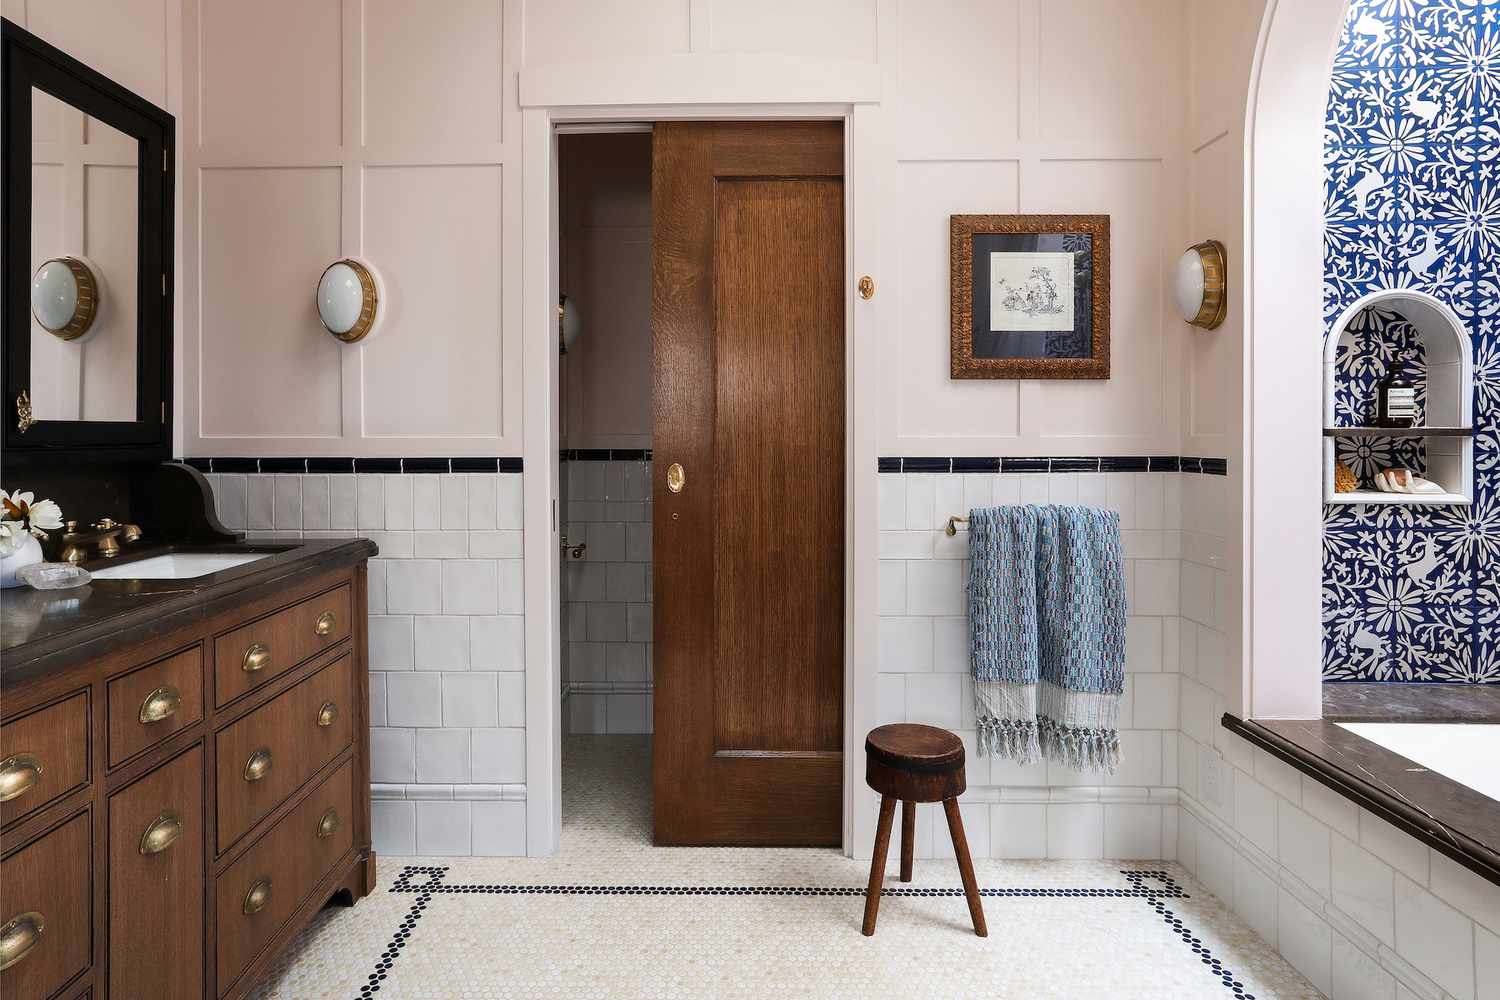 Bathroom Reveal by Landed Interiors, tile floor and light pink walls